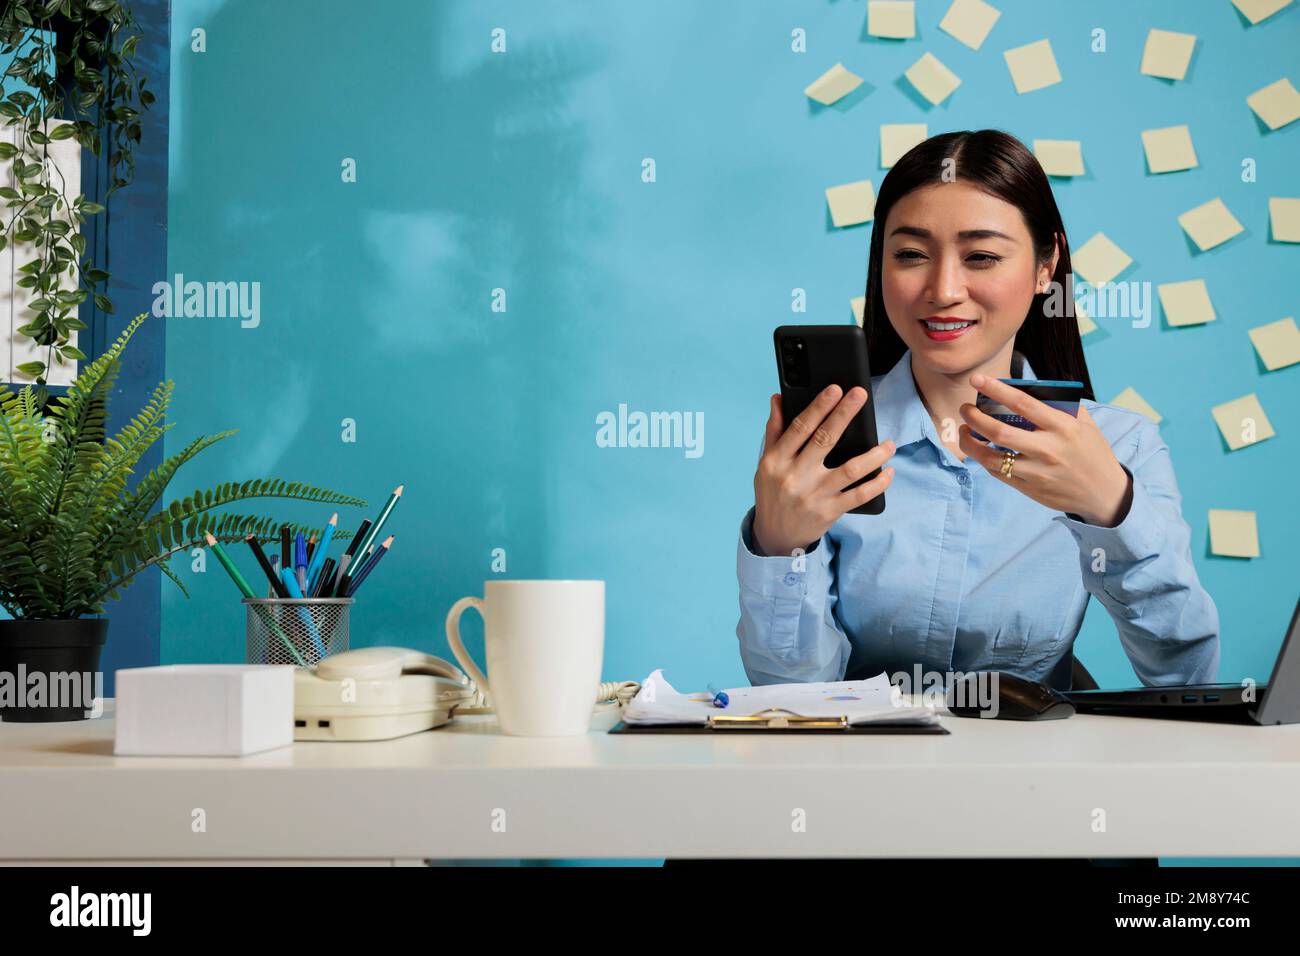 Asian businesswoman holding credit card making financial purchase for business from office. Optimistic female employee making payment transaction at desk using smartphone. Stock Photo